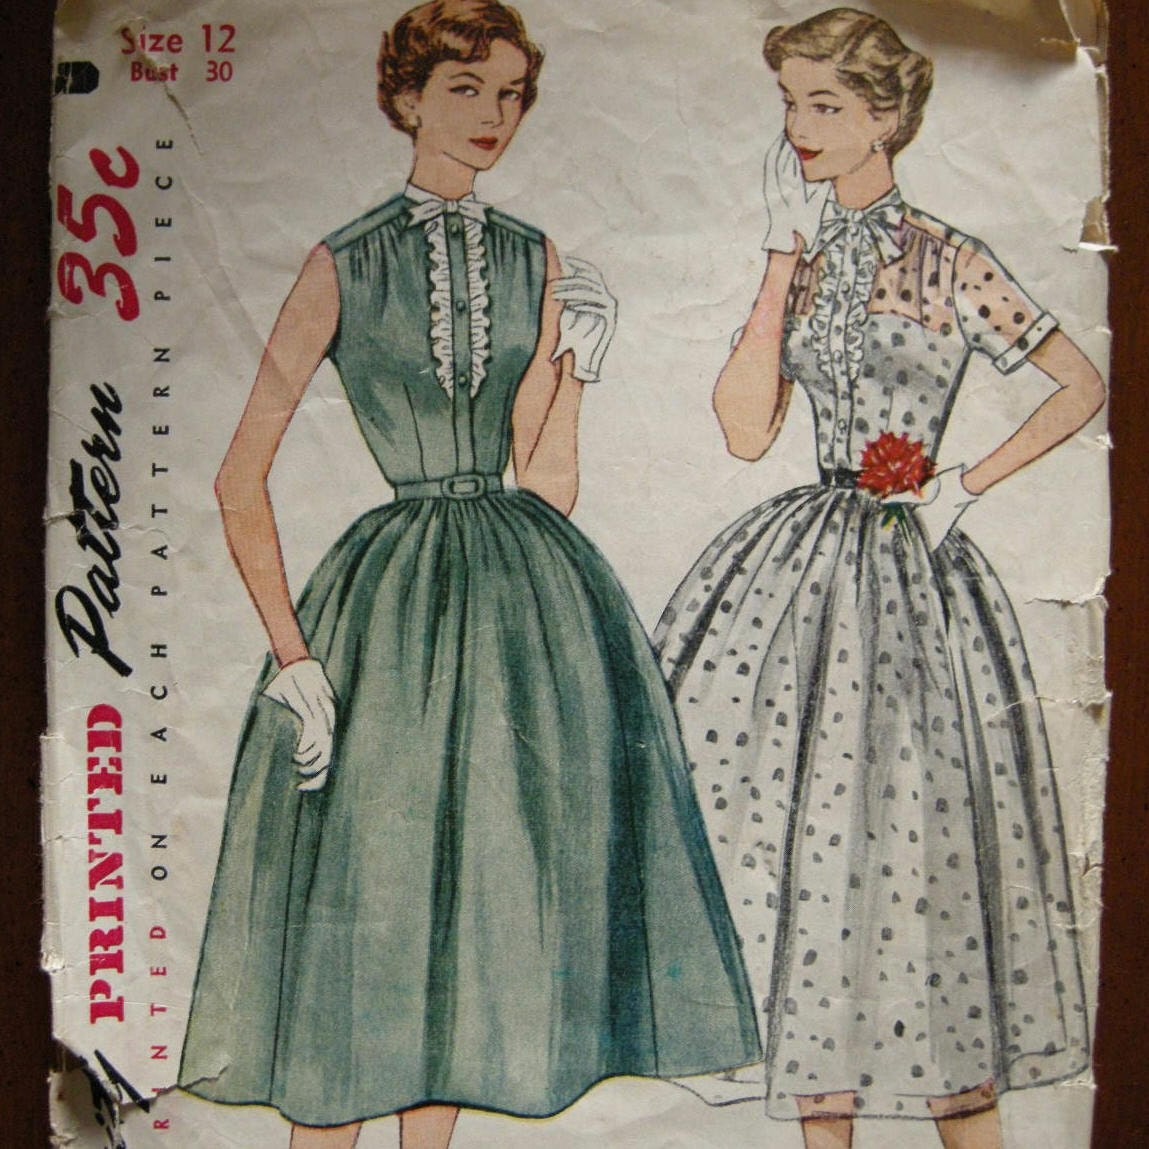 Dress patterns from 1923 (11/06/2006) - Antiques, Art and